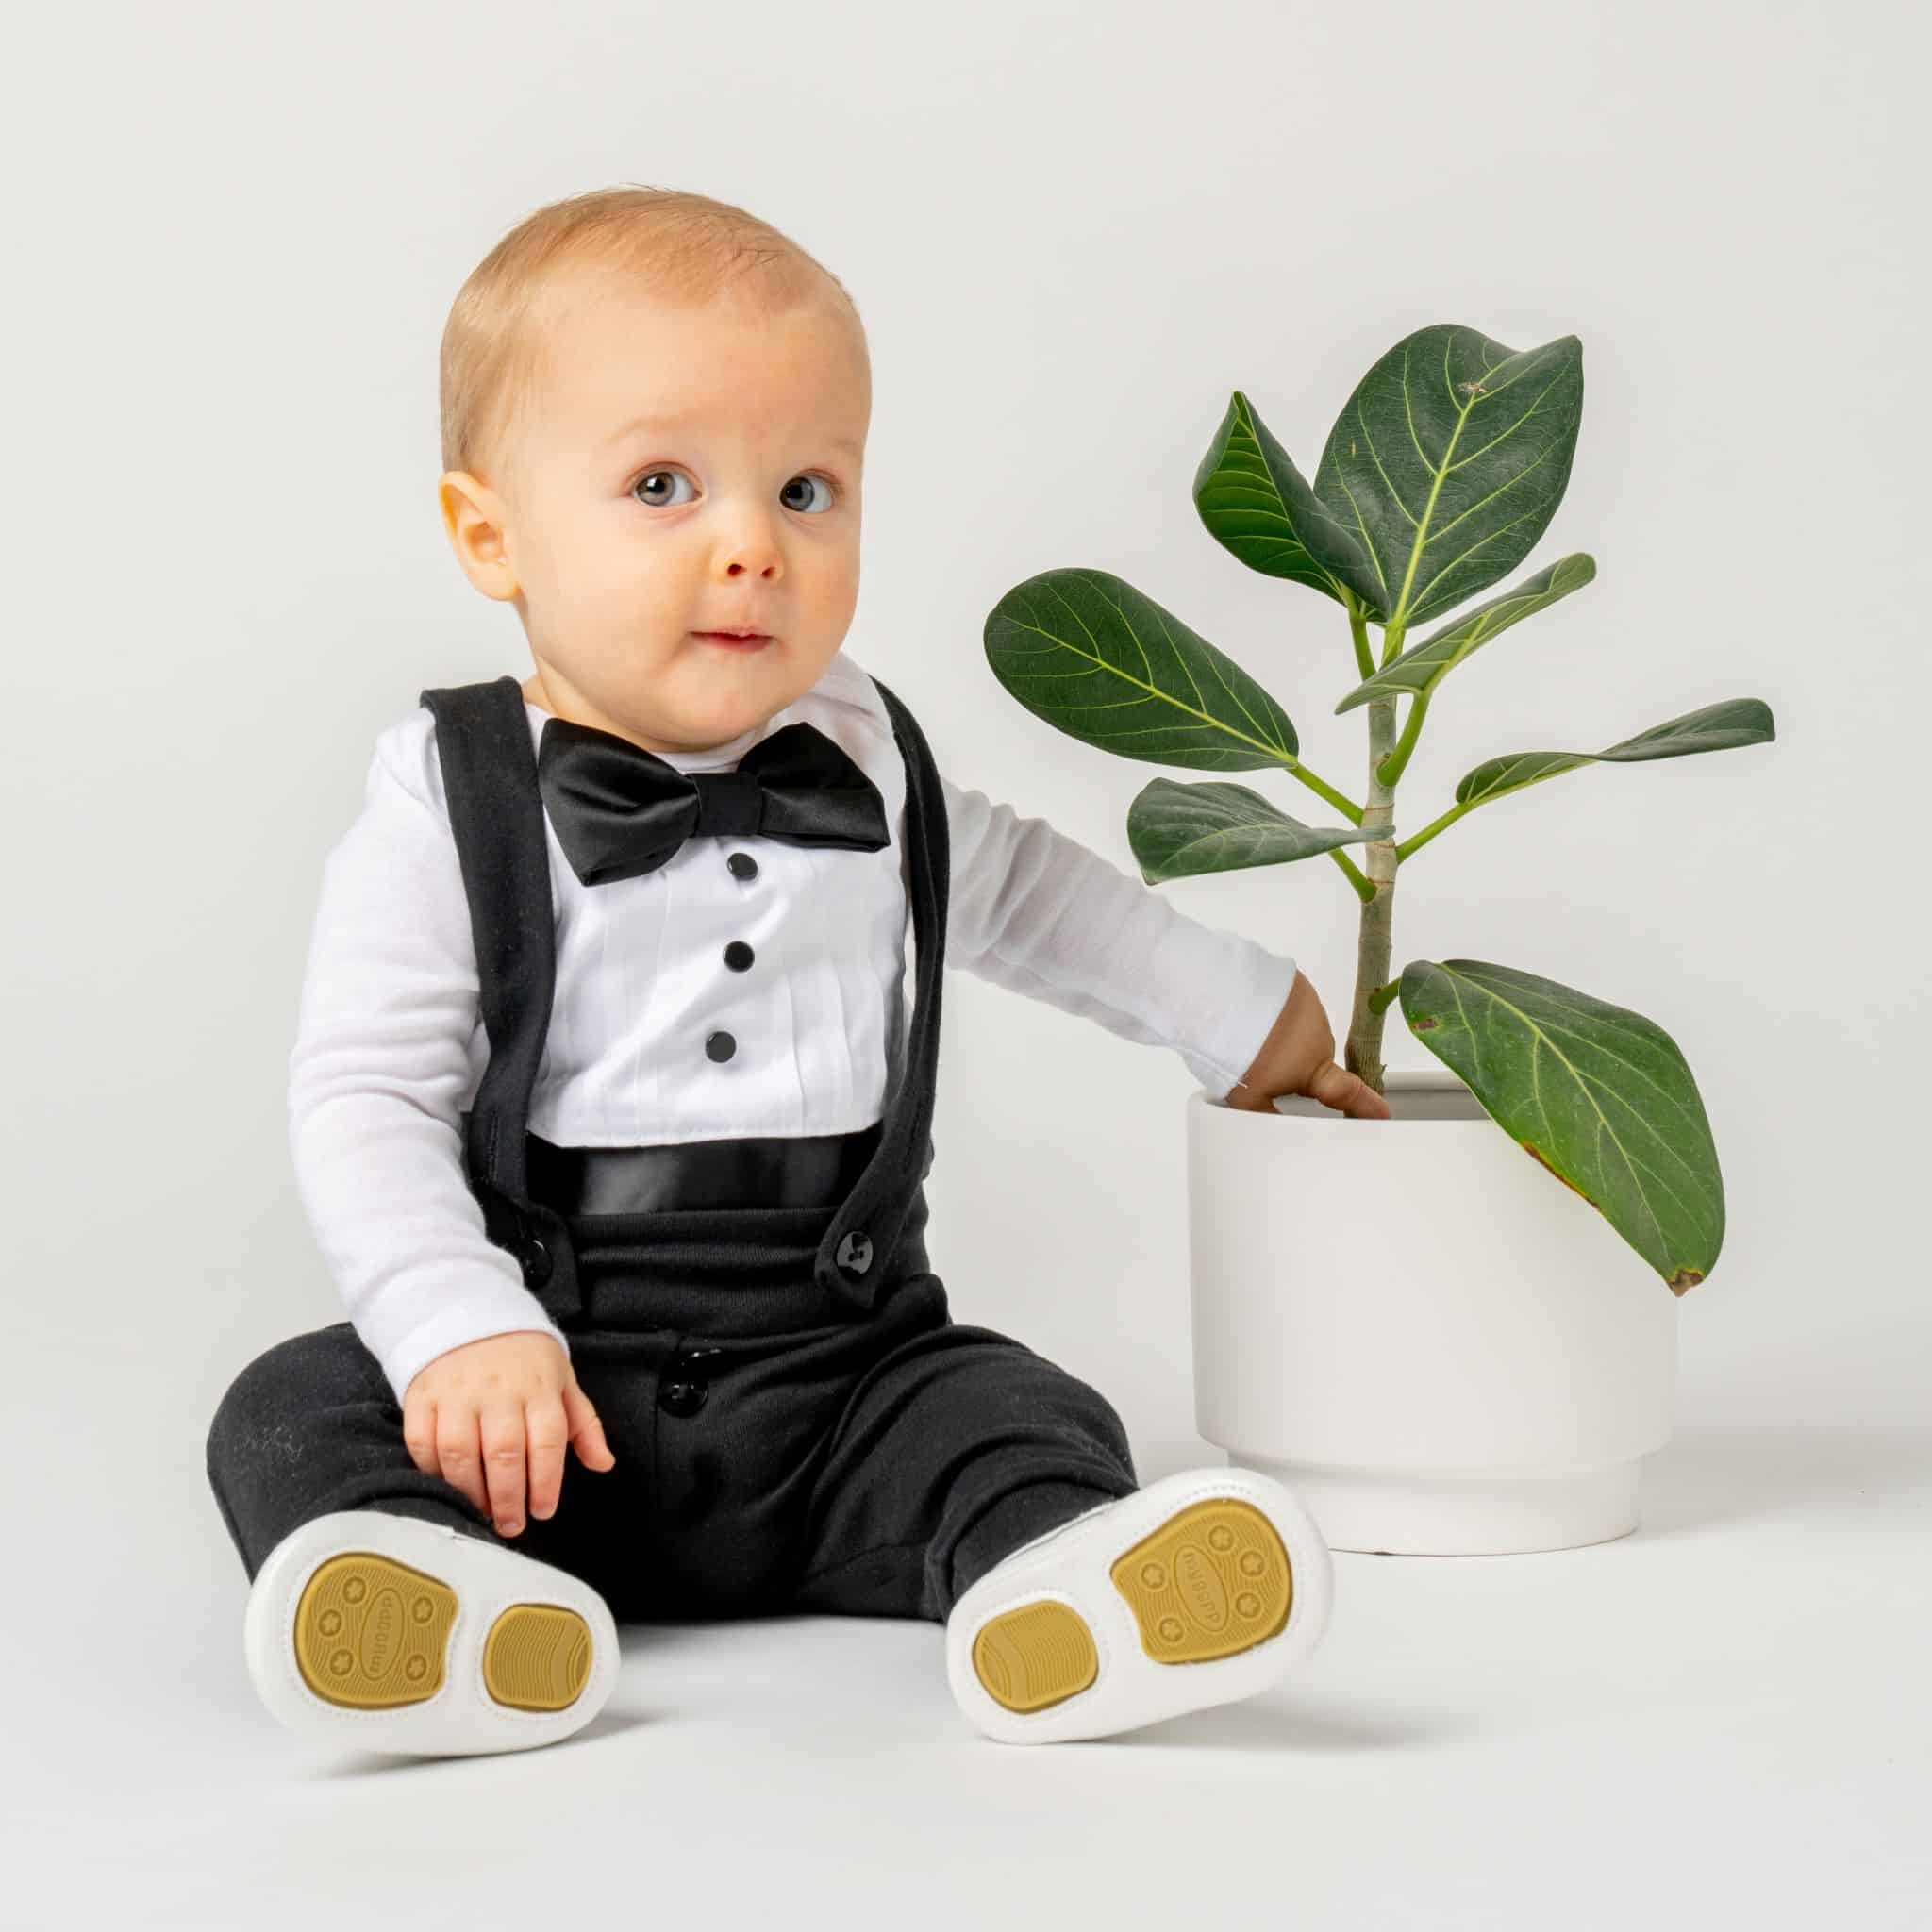 Baby Boy Wedding Tuxedo Formal Party Wear Suit Clothes Outfit Set NEWBORN 000-2 